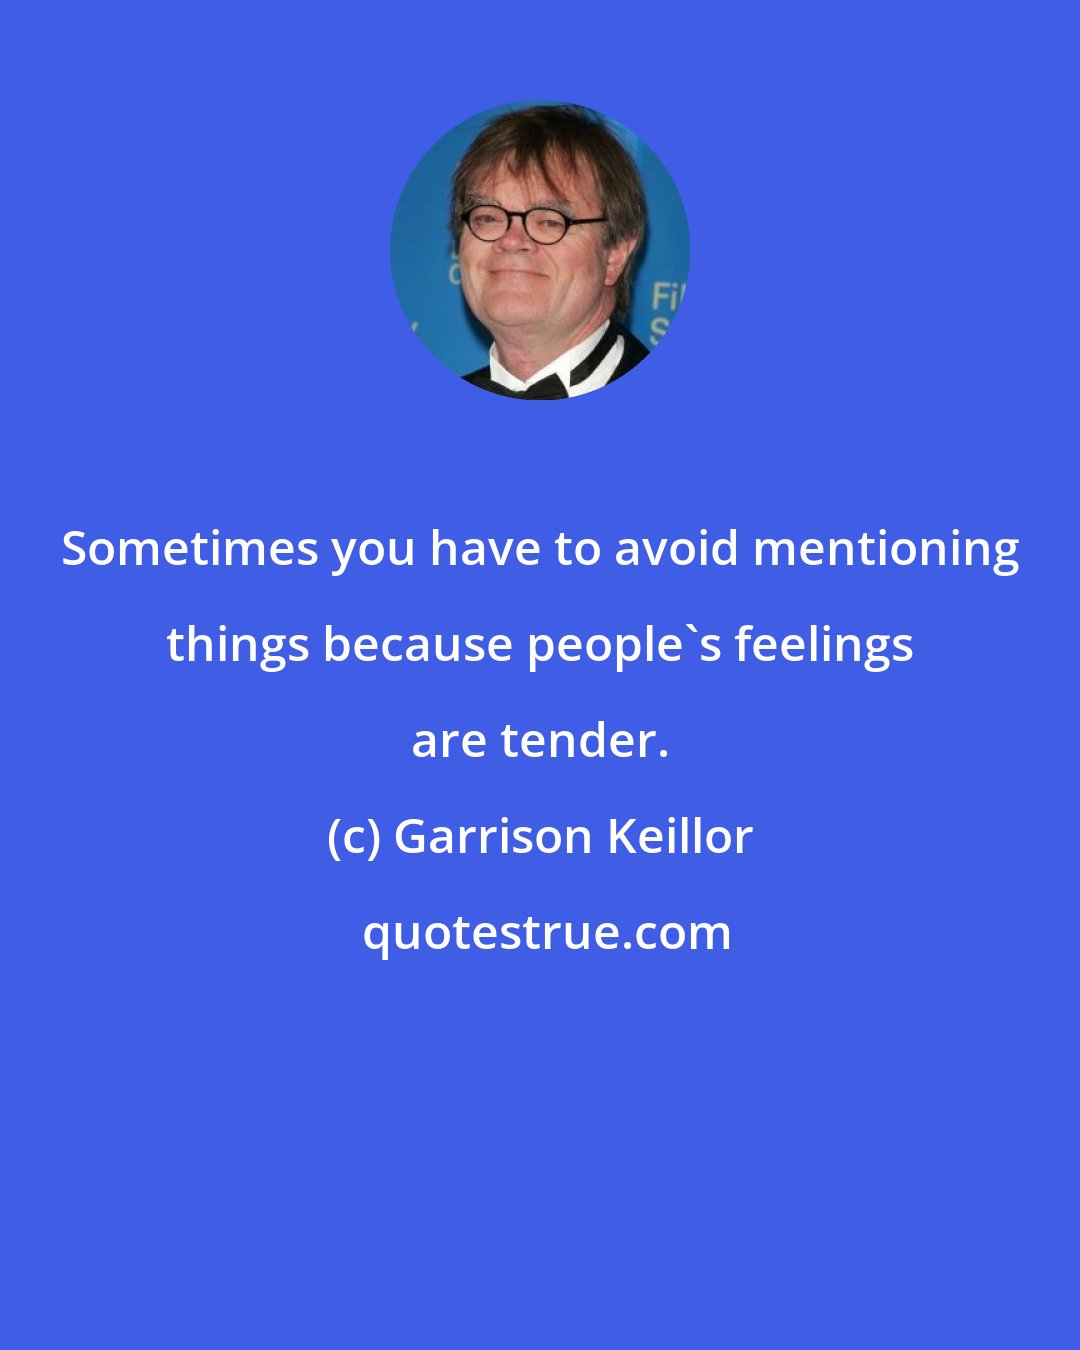 Garrison Keillor: Sometimes you have to avoid mentioning things because people's feelings are tender.